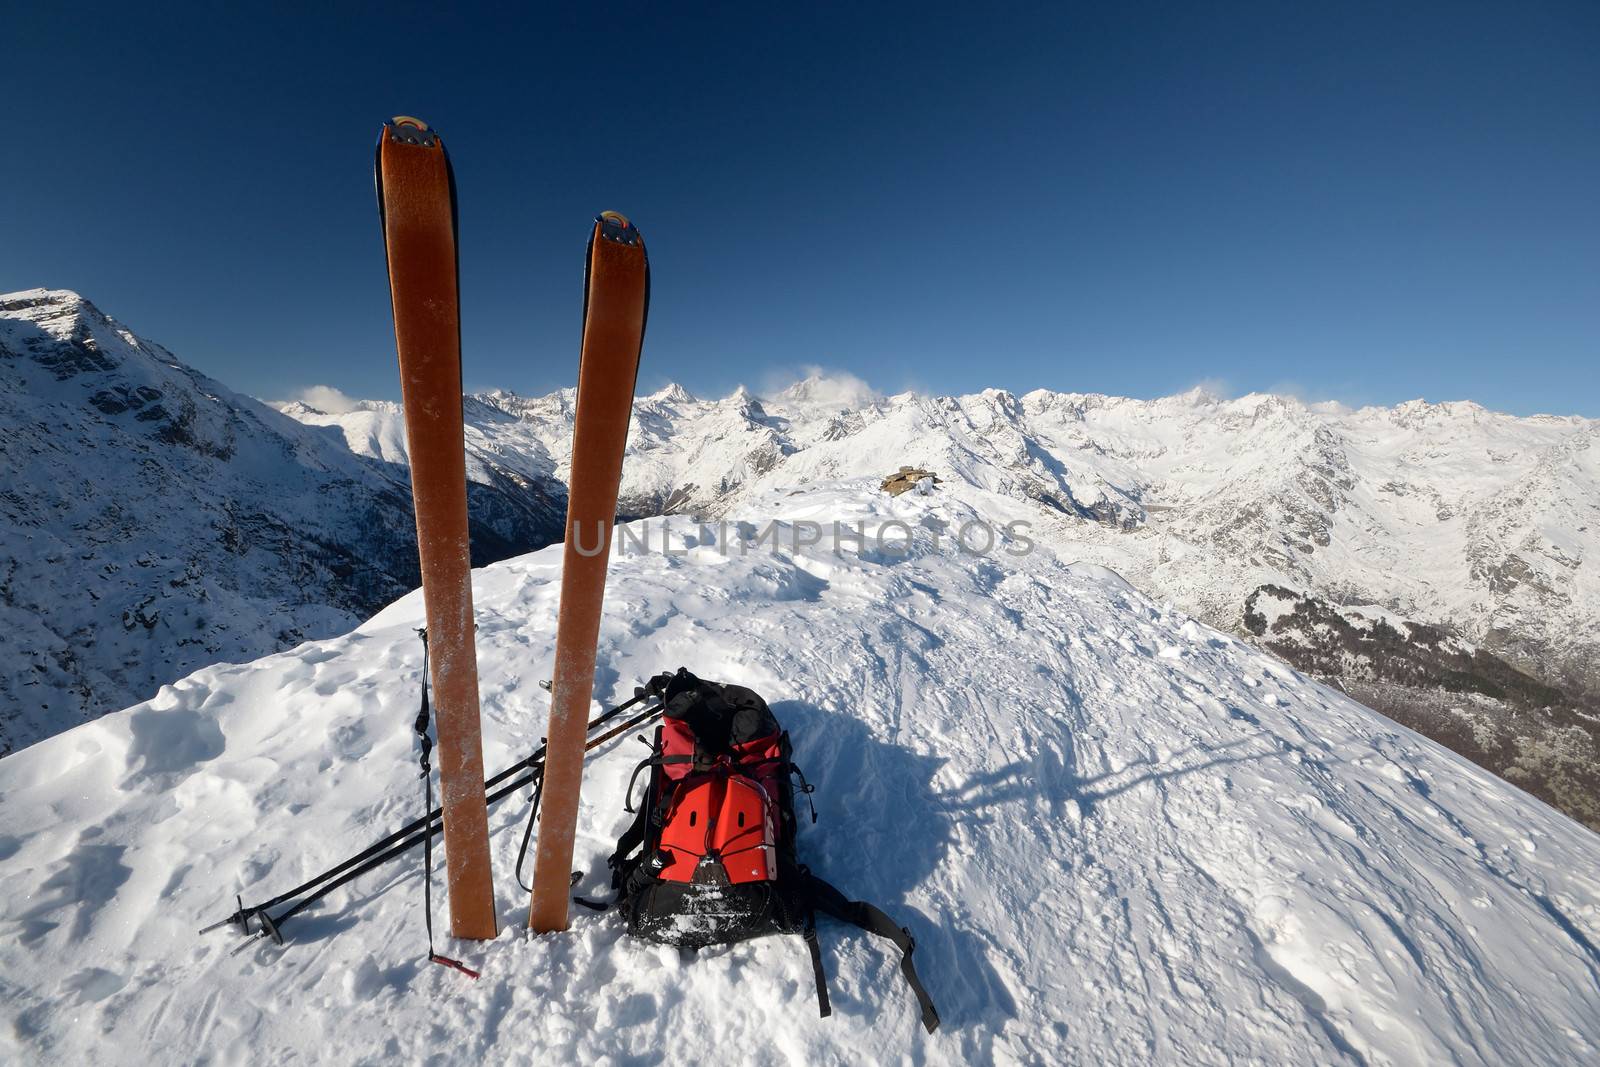 On the top of the mountain, pair of back country - tour ski and a backpack with avalanche safety tools. Scenic high mountain background (Gran Paradiso peak, 4061 m).